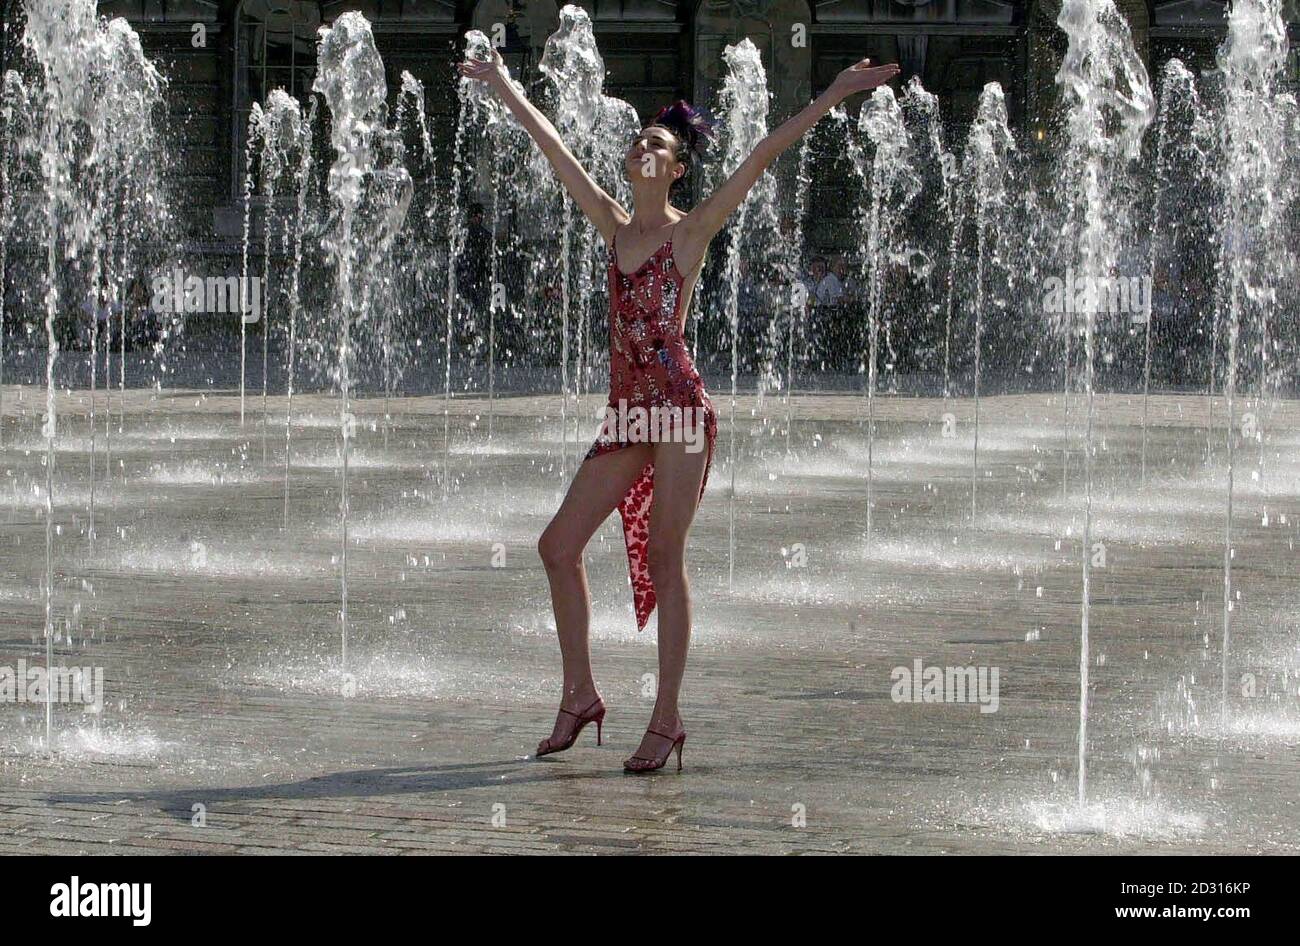 British supermodel, Erin O'Connor, in the fountains on Central Square, Somerset House in London, launching London Fashion Week. Stock Photo